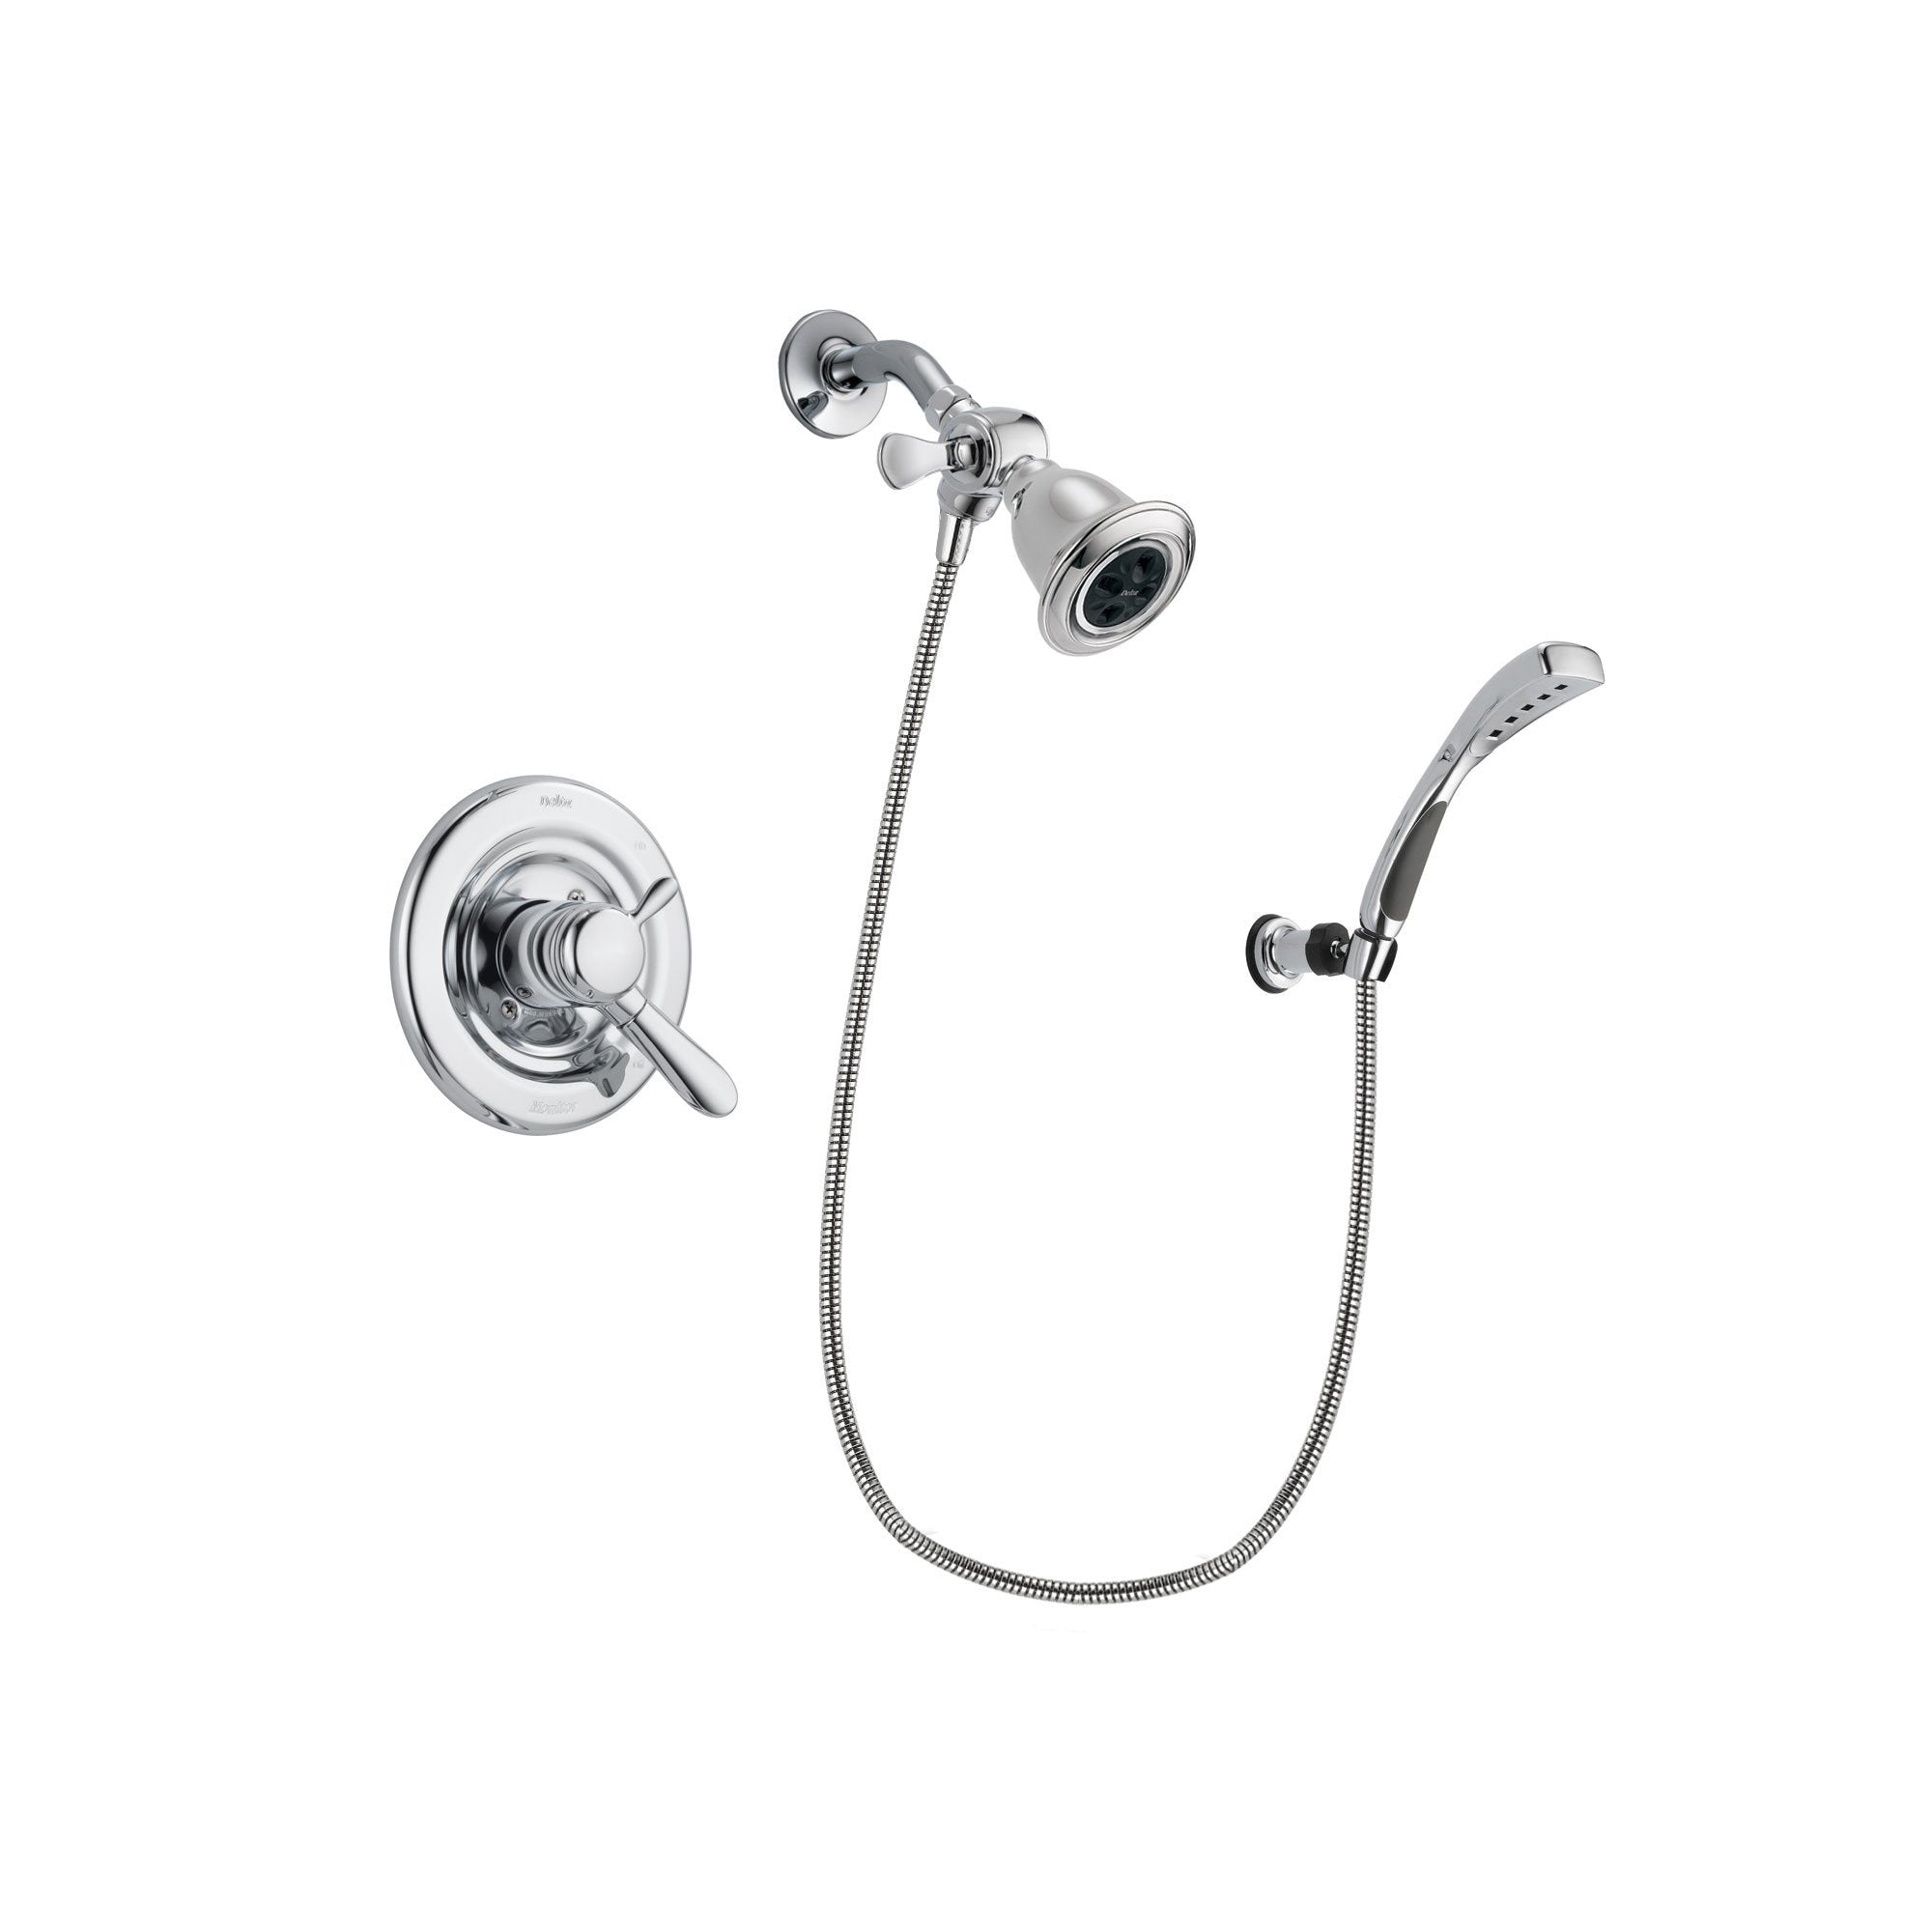 Delta Lahara Chrome Finish Dual Control Shower Faucet System Package with Water Efficient Showerhead and Wall-Mount Bracket with Handheld Shower Spray Includes Rough-in Valve DSP1024V